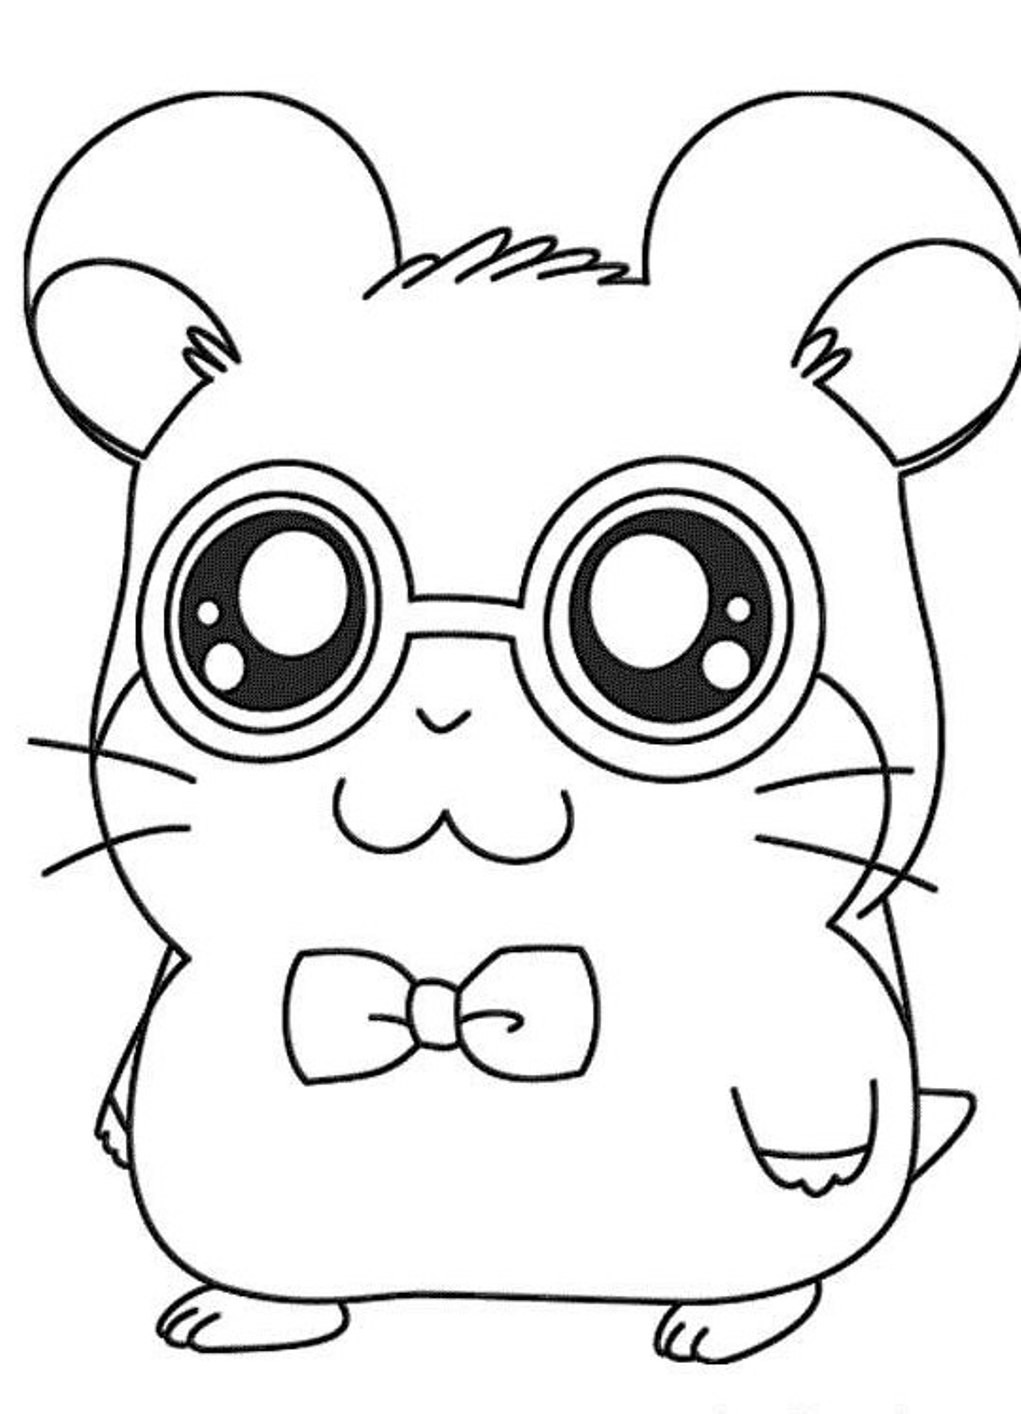 Cute Easy Coloring Pages at Free